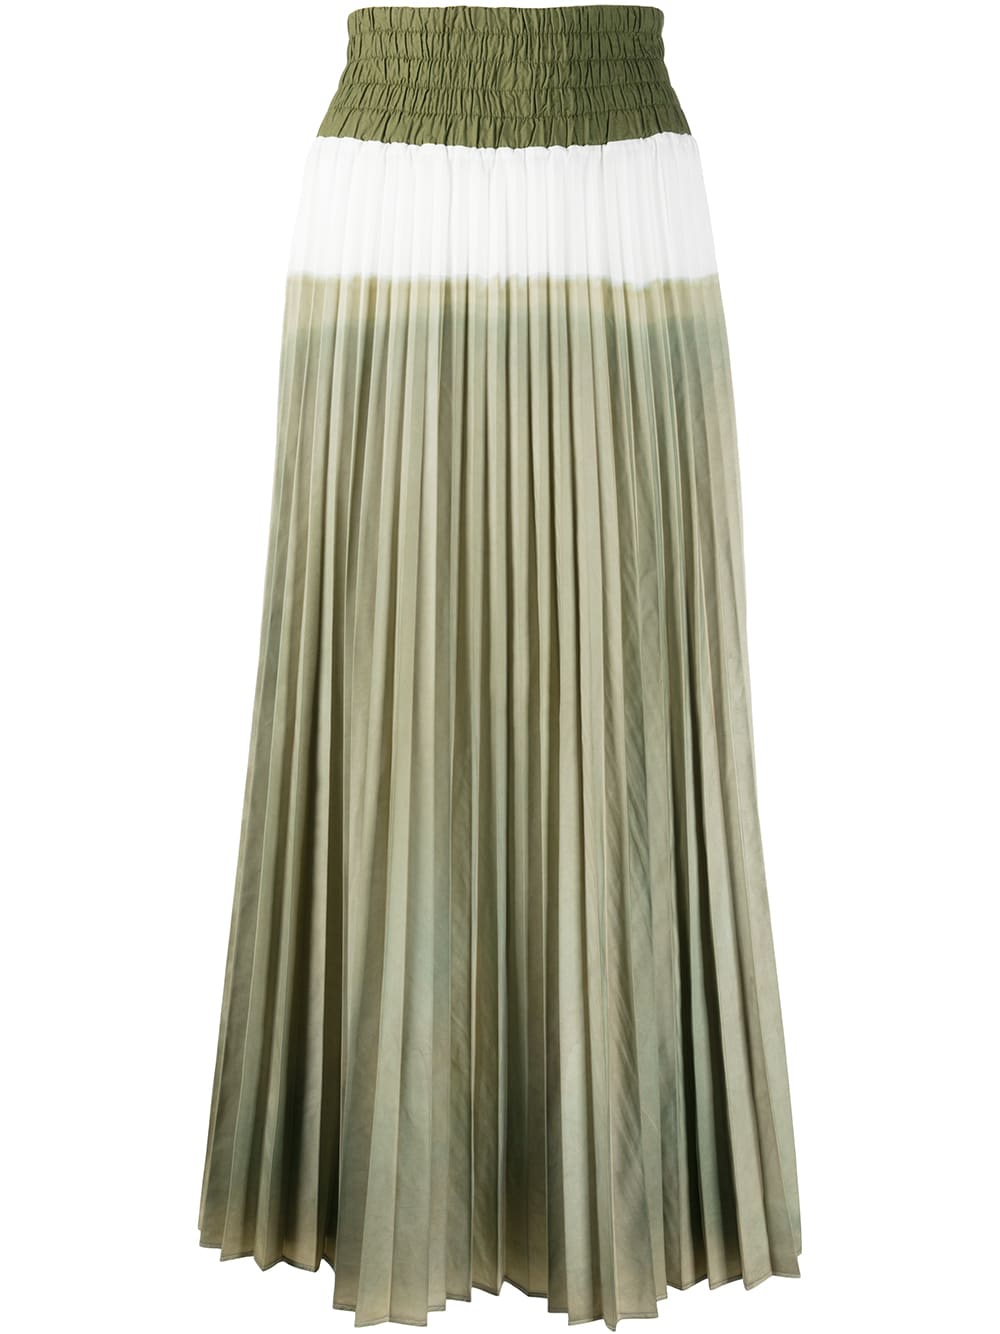 Mr & Mrs Italy Long Skirt With Tie-dye Plisse